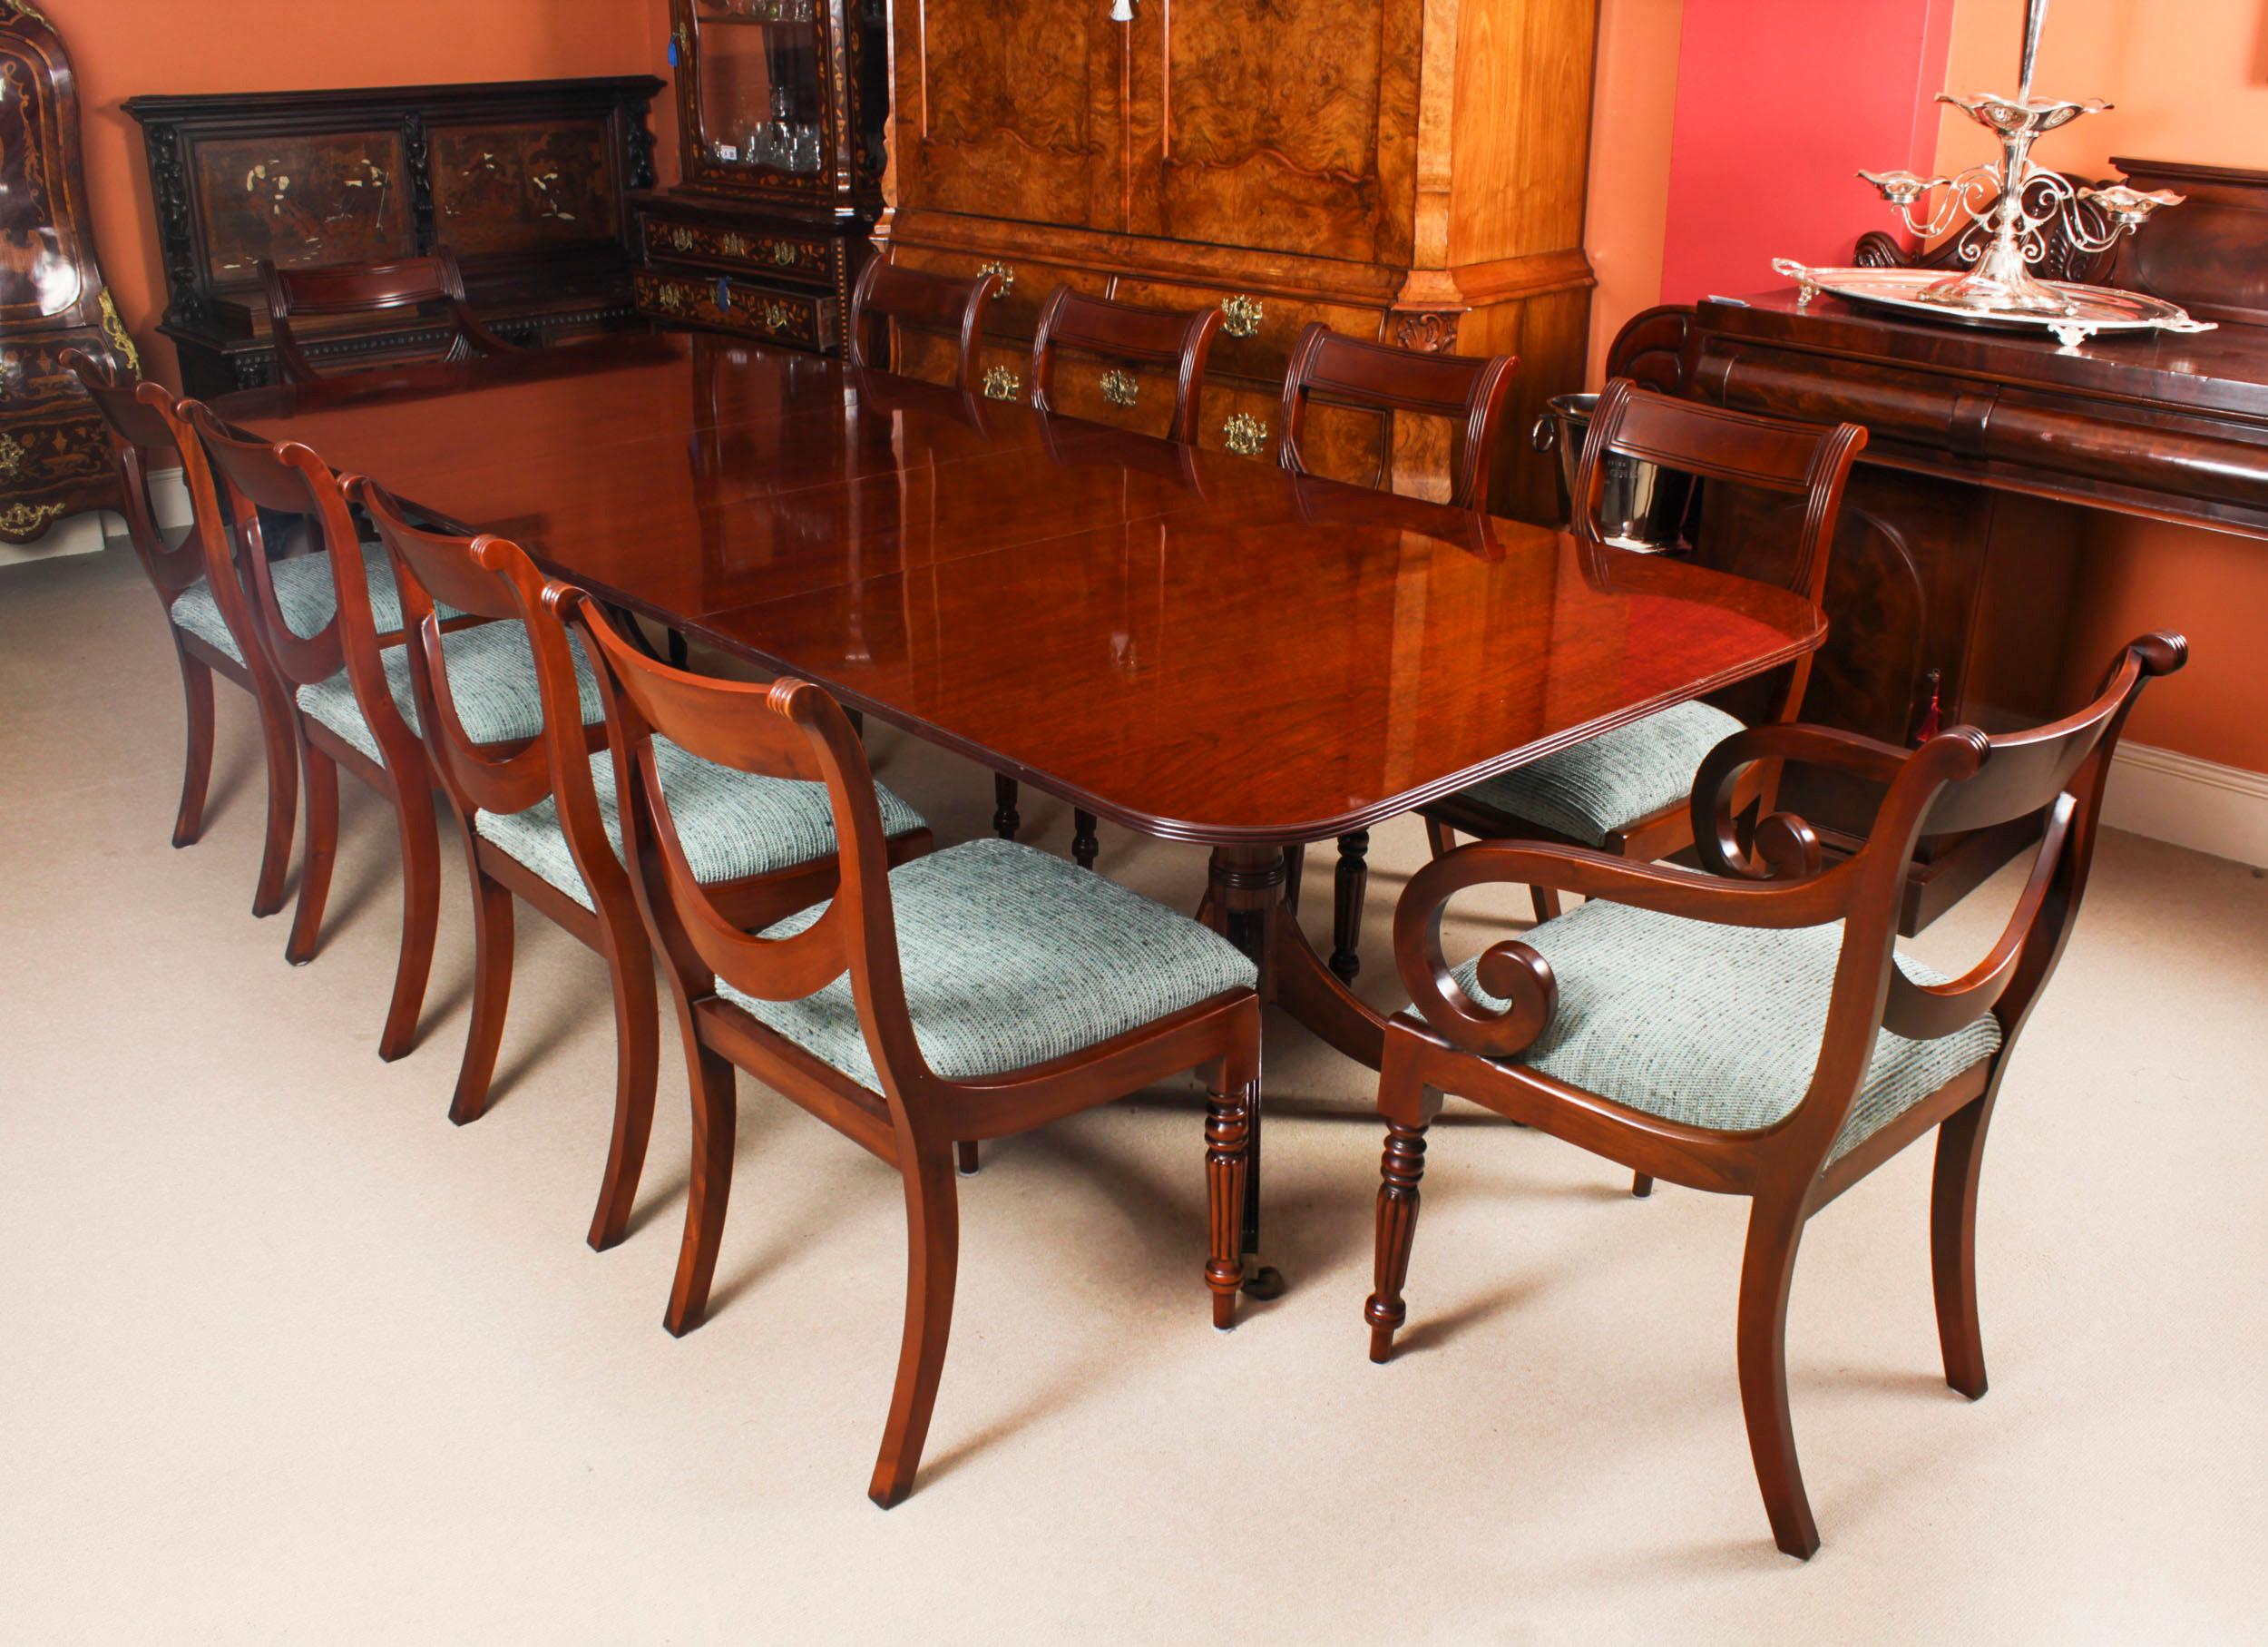 This is  a fabulous Vintage Regency Revival dining table by the master craftsman, William Tillman, Circa 1980 in date.

The table is made of stunning solid flame mahogany and is raised on a pair of 